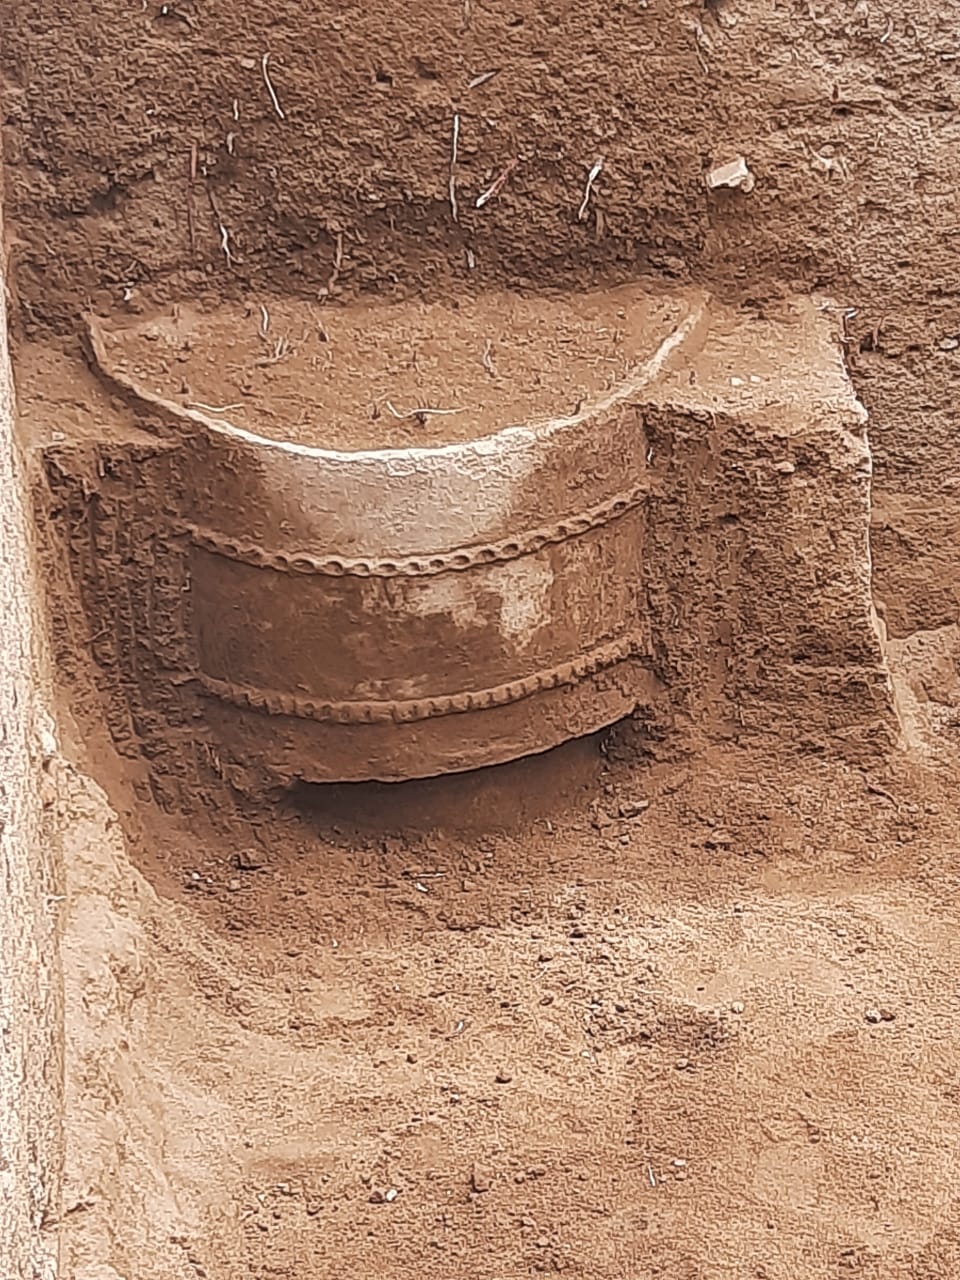 keezhadi_ring_well_found in seventh excavation